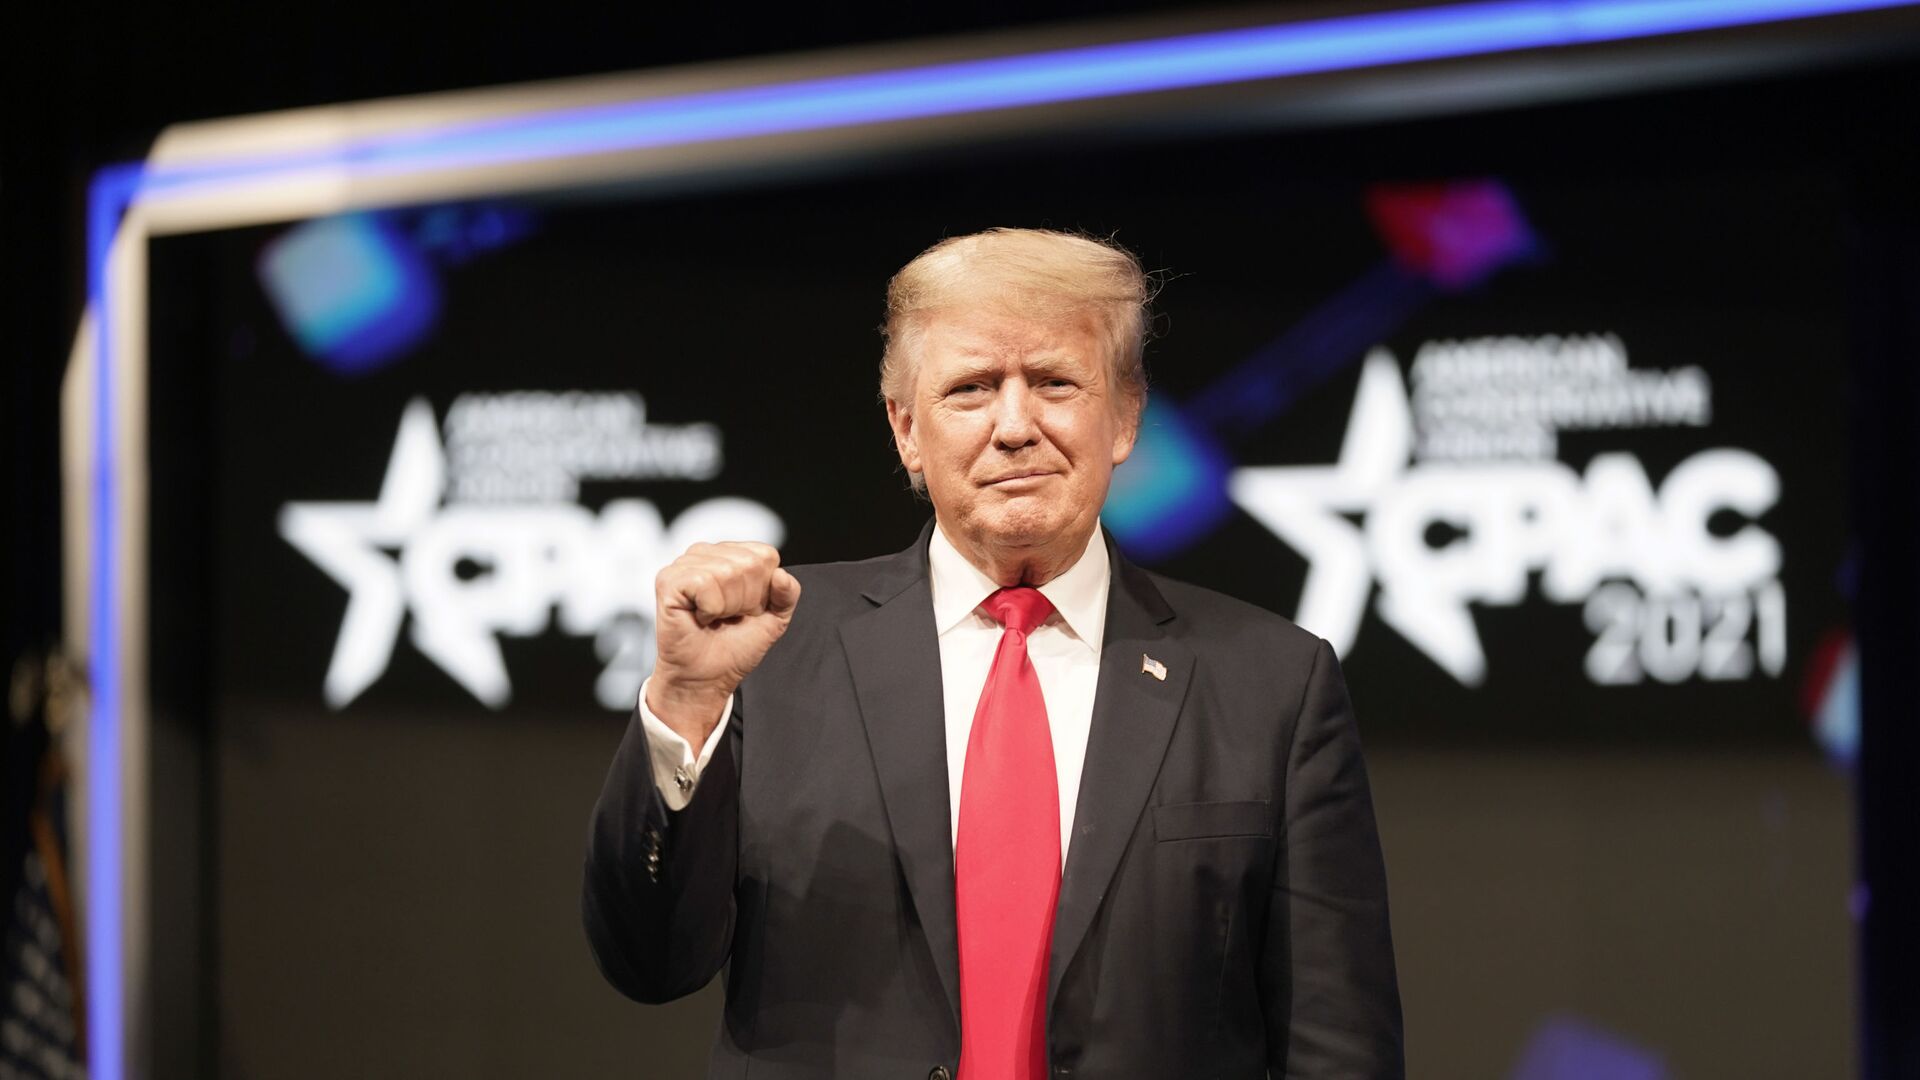 Former president Donald Trump raises his fist before speaking at the Conservative Political Action Conference (CPAC) Sunday, July 11, 2021, in Dallas.  - Sputnik International, 1920, 12.07.2021